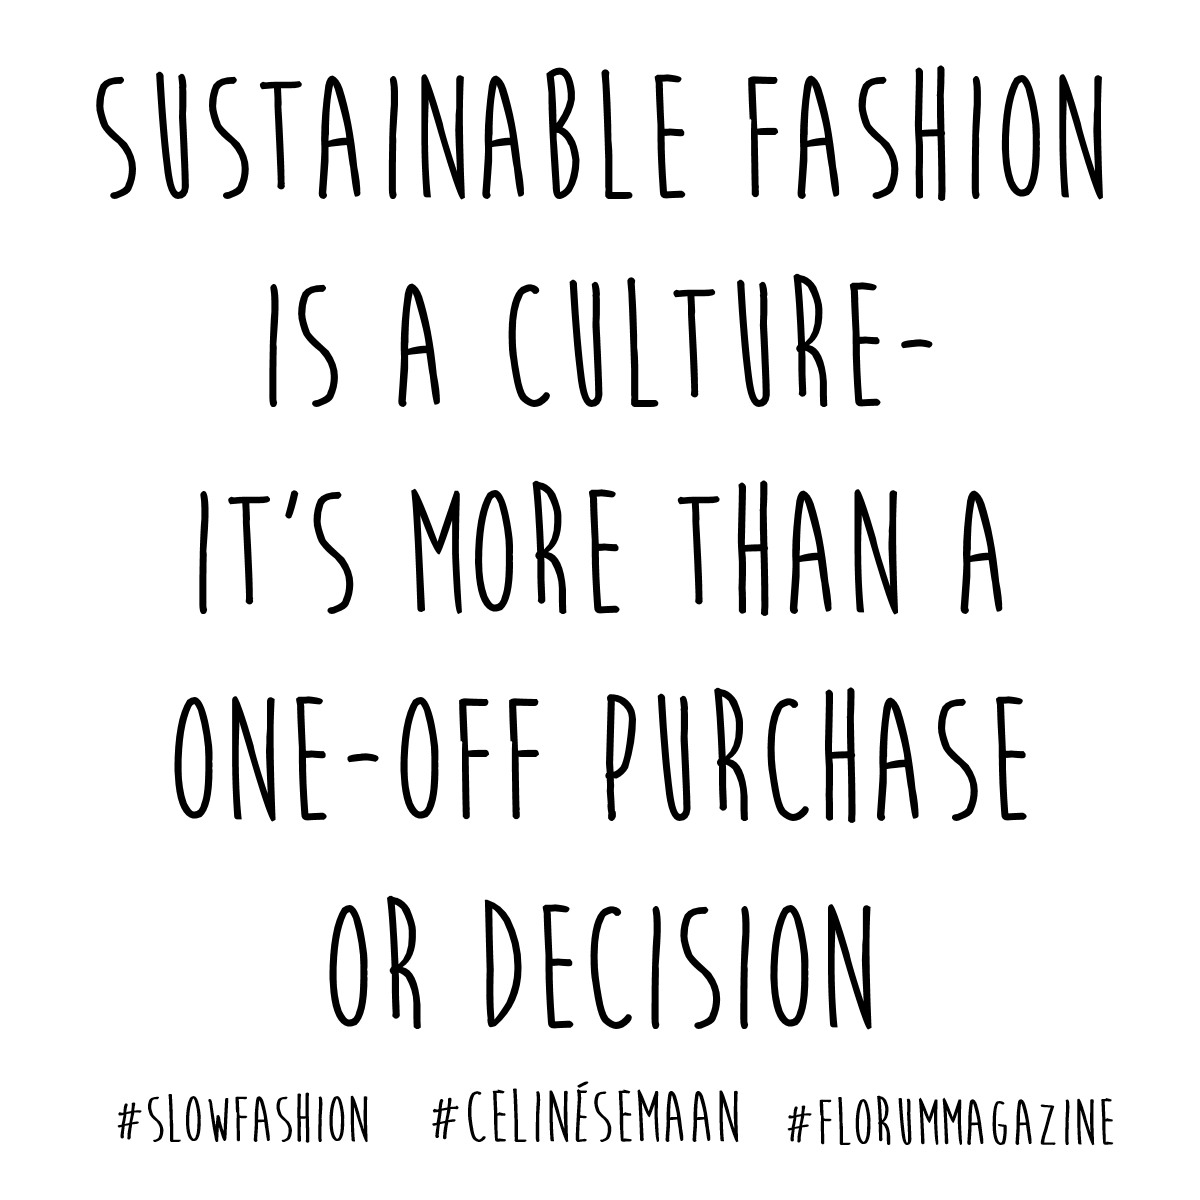 celine samaan quote for florum fashion magazine - sustainable fashion - fash revolution - ethical style.jpg